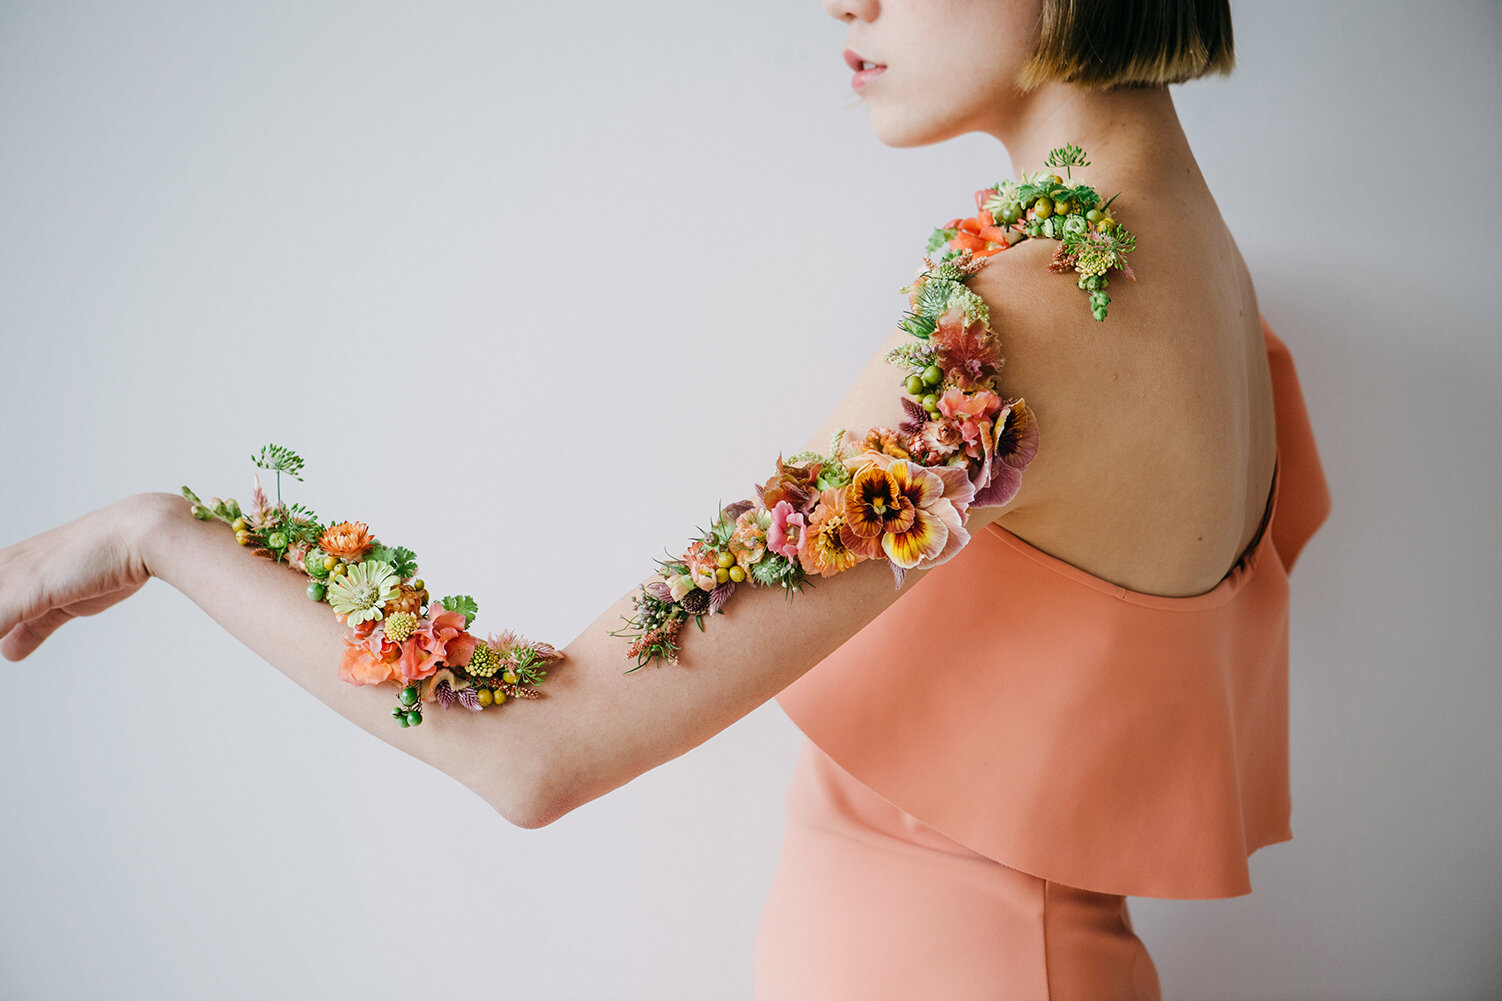 Susan McLeary and the Art of Wearable Flowers - Flower tattoo